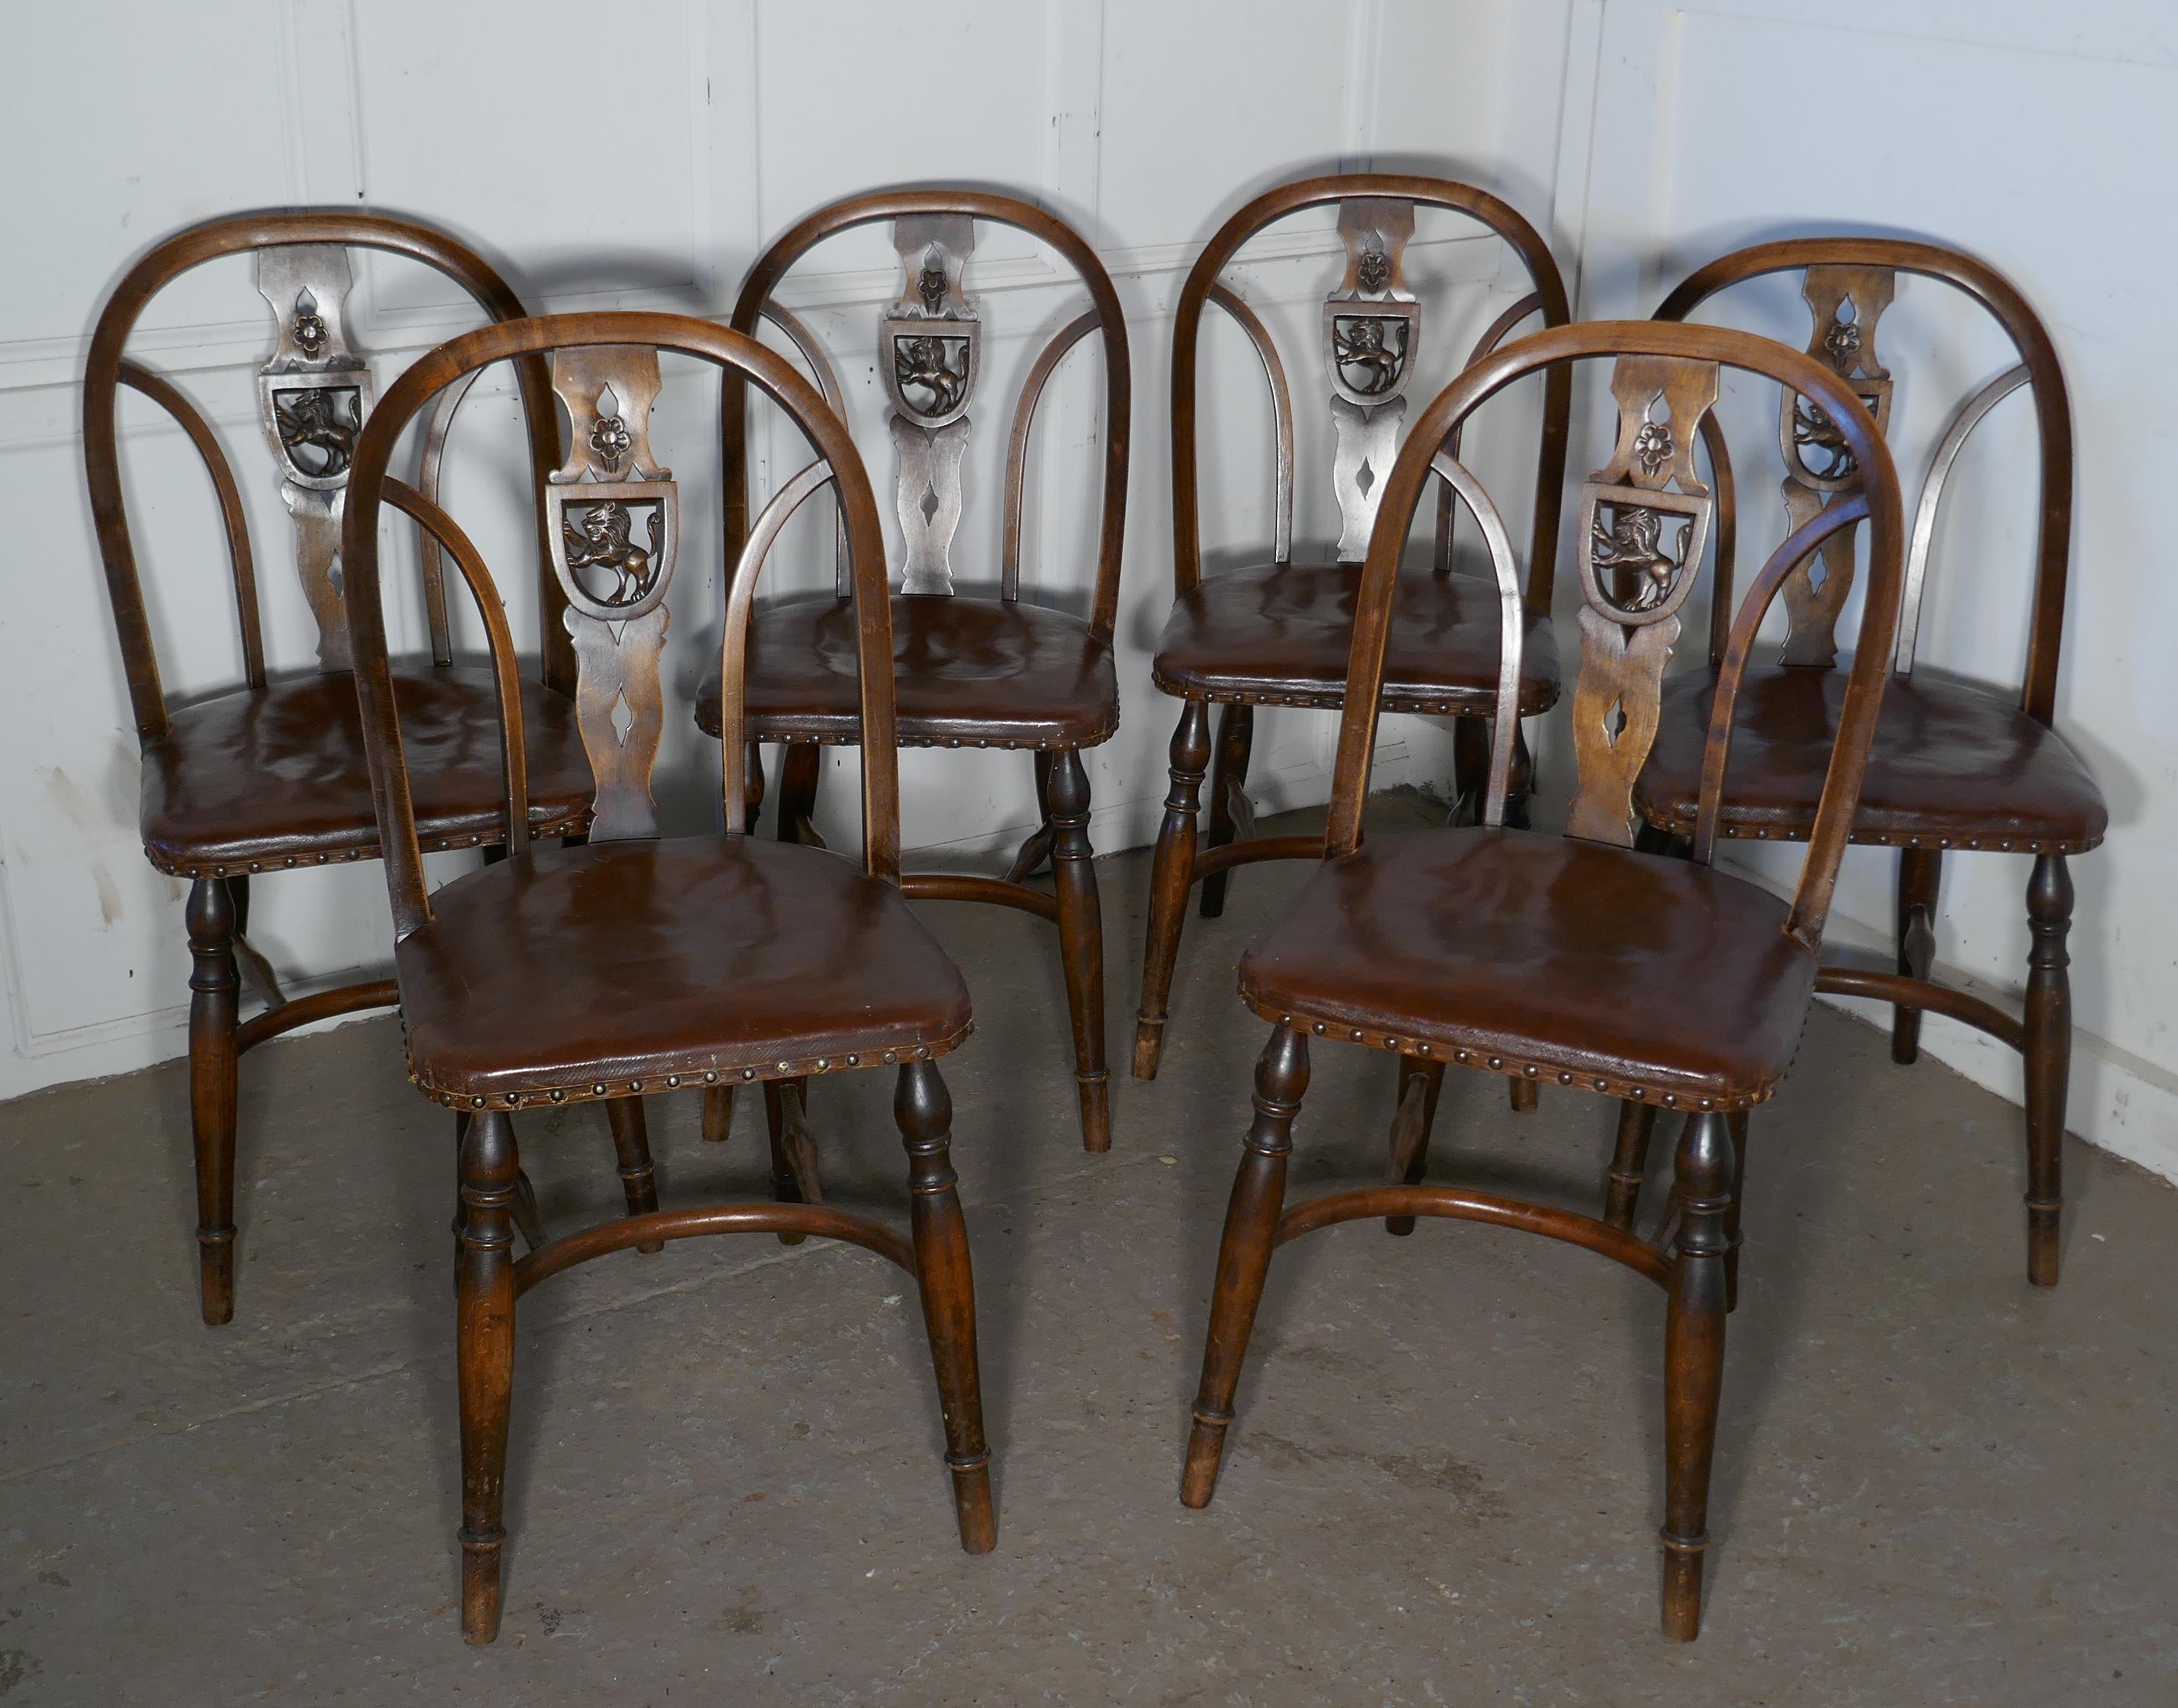 Set of 6 Arts & Crafts Gothic Heraldic lion back Windsor chairs.

A very unusual set of Windsor chairs, the centre splat of each chair has Gothic shield carved with a Rampant lion in the centre
The chairs are good Arts & Crafts pieces with